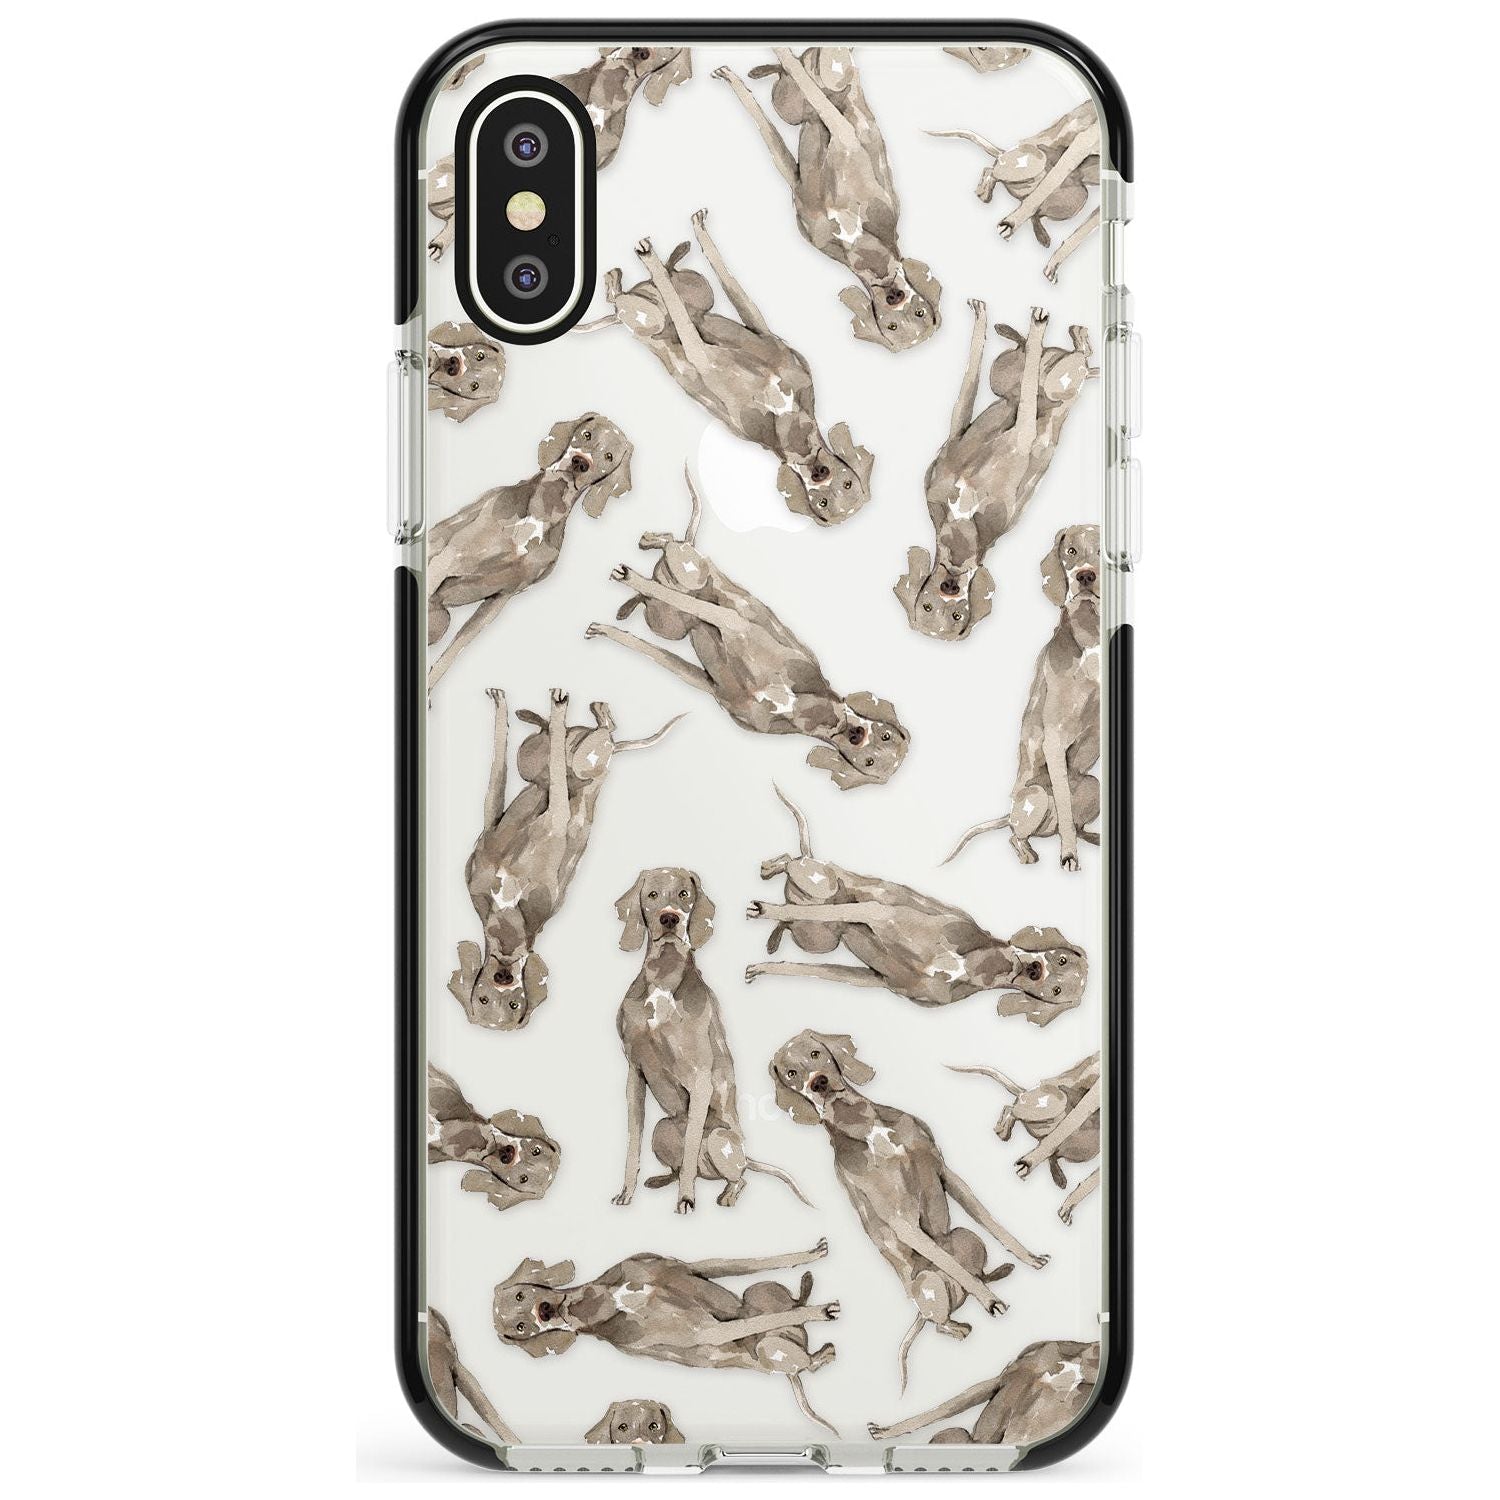 Weimaraner Watercolour Dog Pattern Black Impact Phone Case for iPhone X XS Max XR